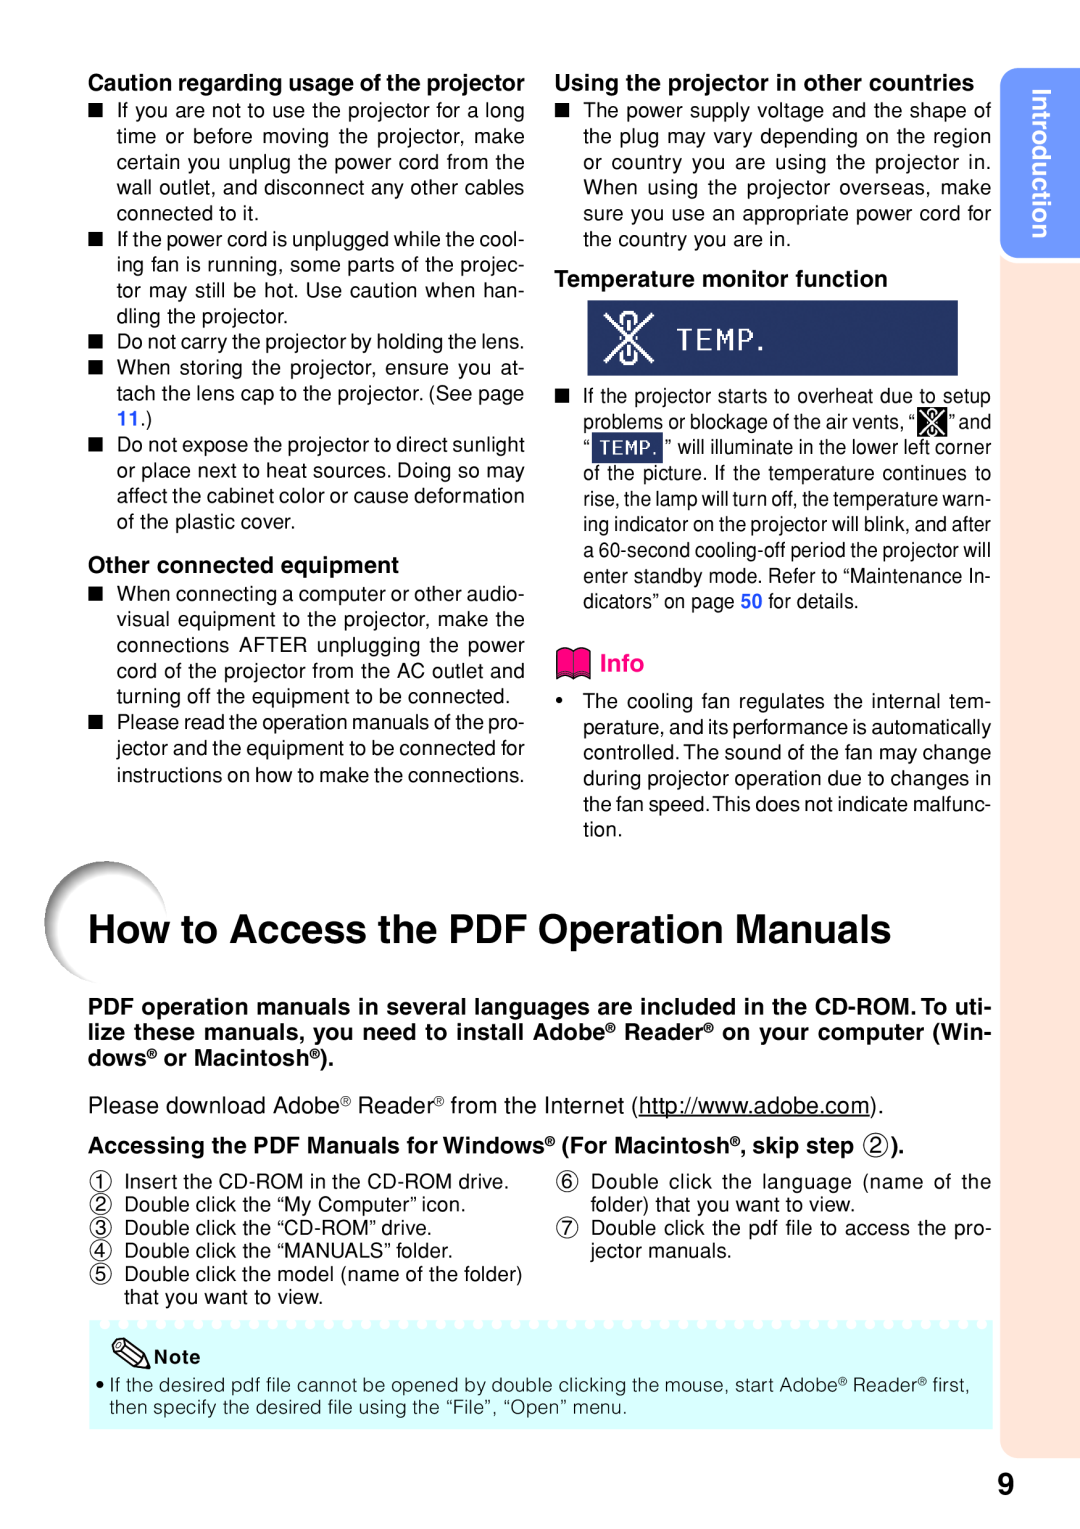 Sharp XR-32S-L How to Access the PDF Operation Manuals, Info, Introduction, Caution regarding usage of the projector 